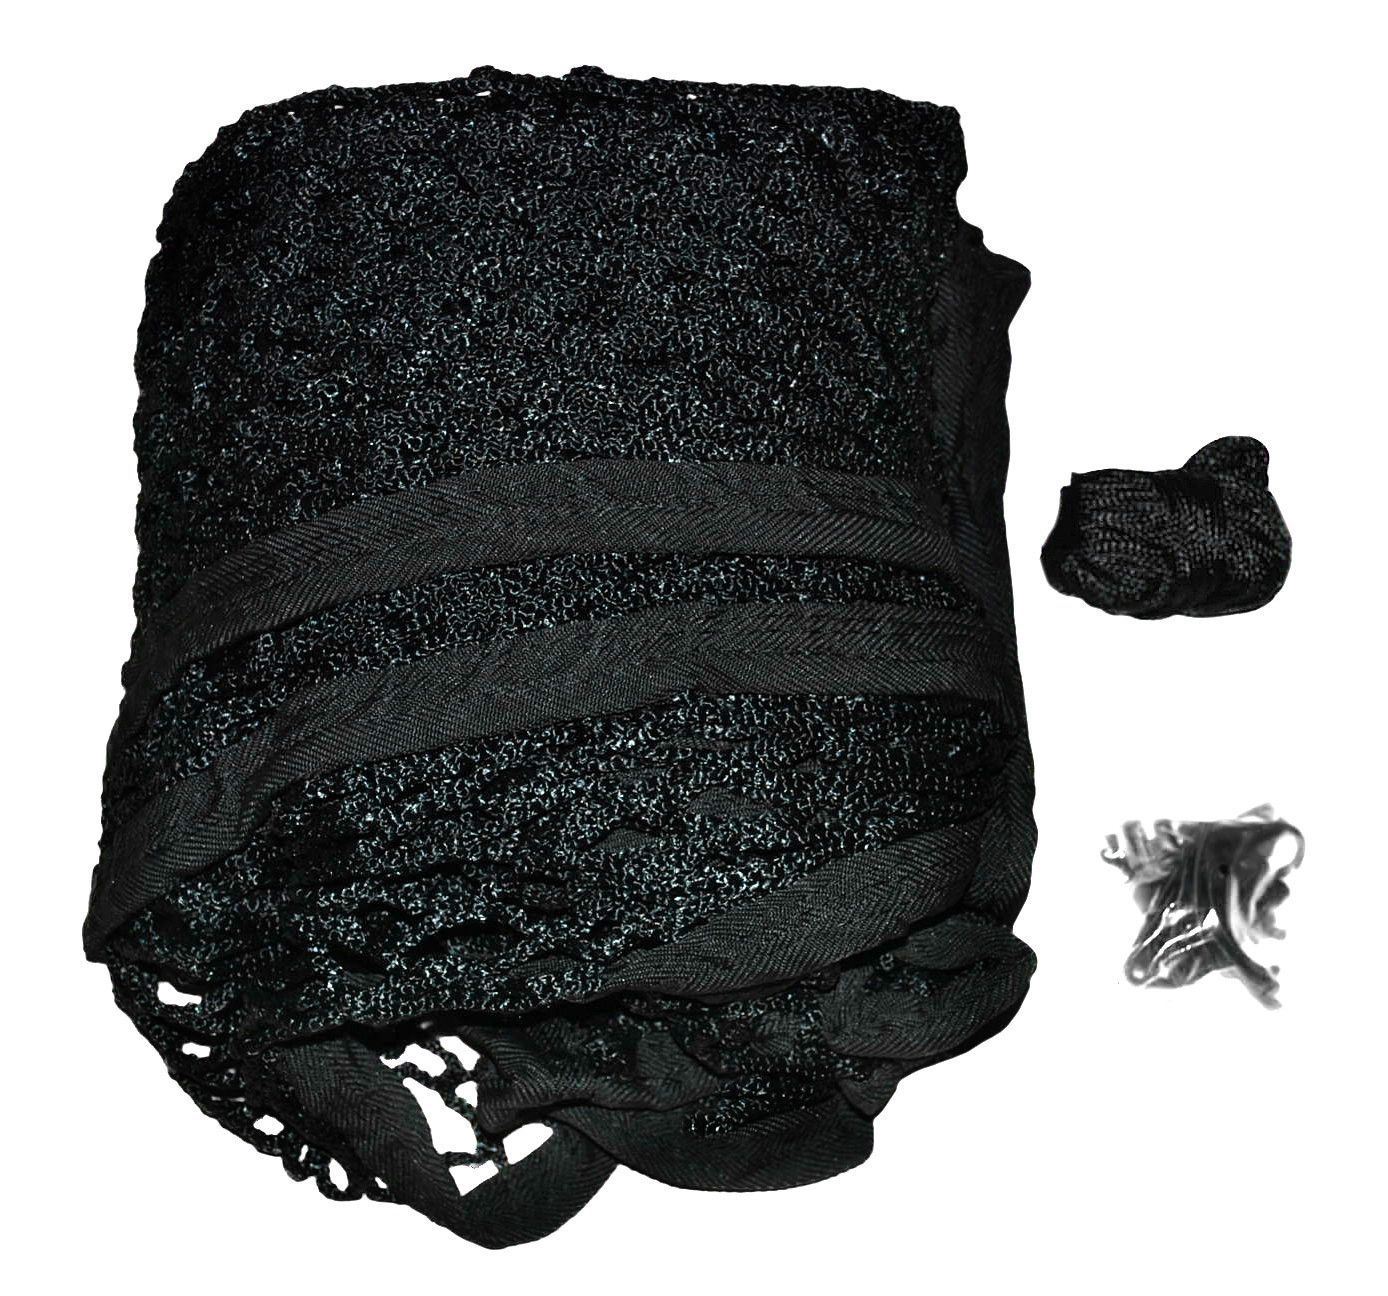 (4'6"ft x 4' x 5ft) 6mm Black OR White Box Lacrosse Net by CrankShooter® - FREE Shipping